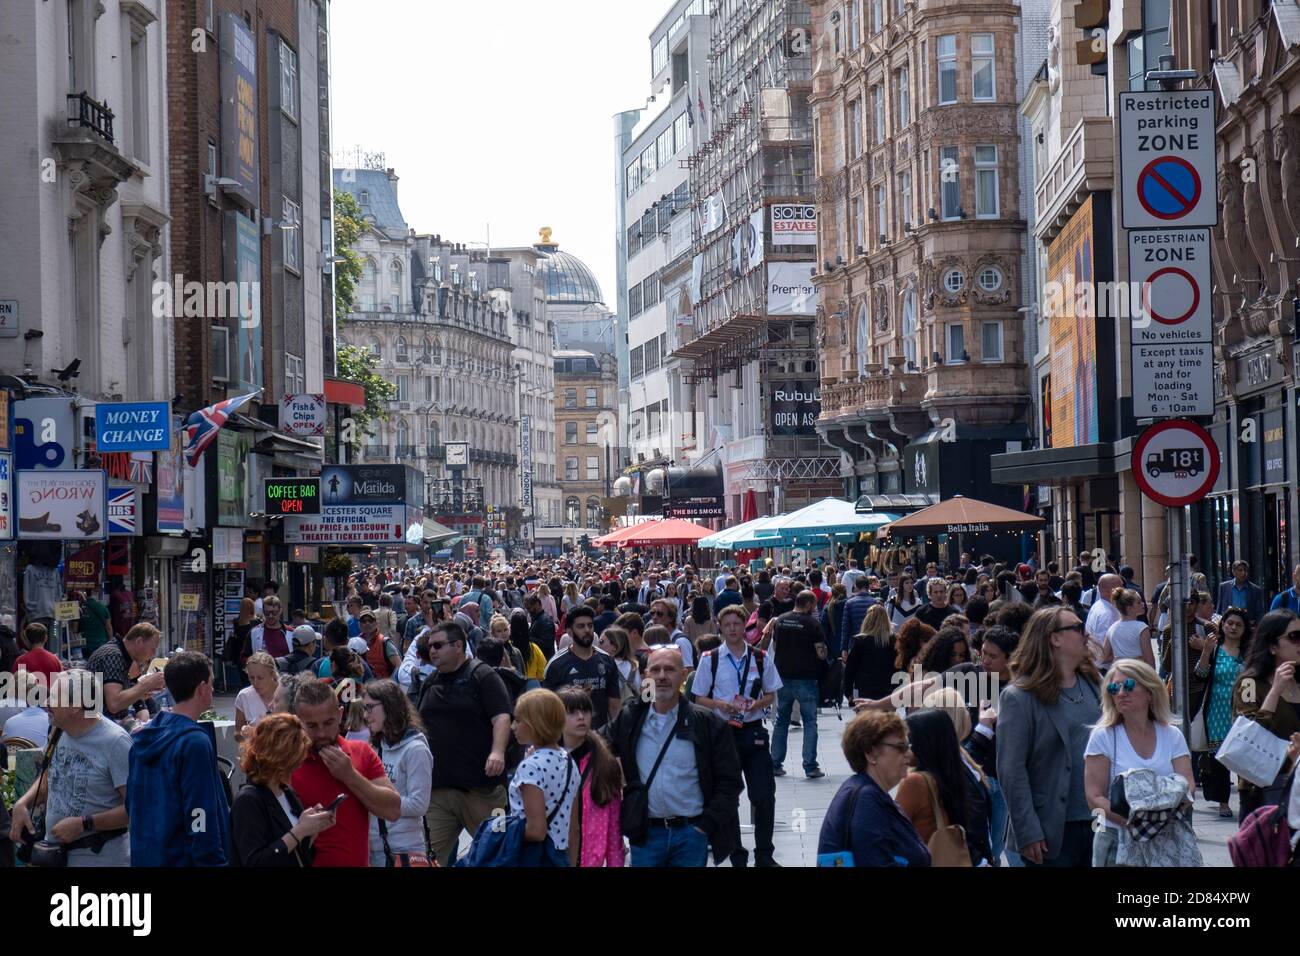 Tourists in a Pedestrian Zone near Leicester Square in London, England Stock Photo